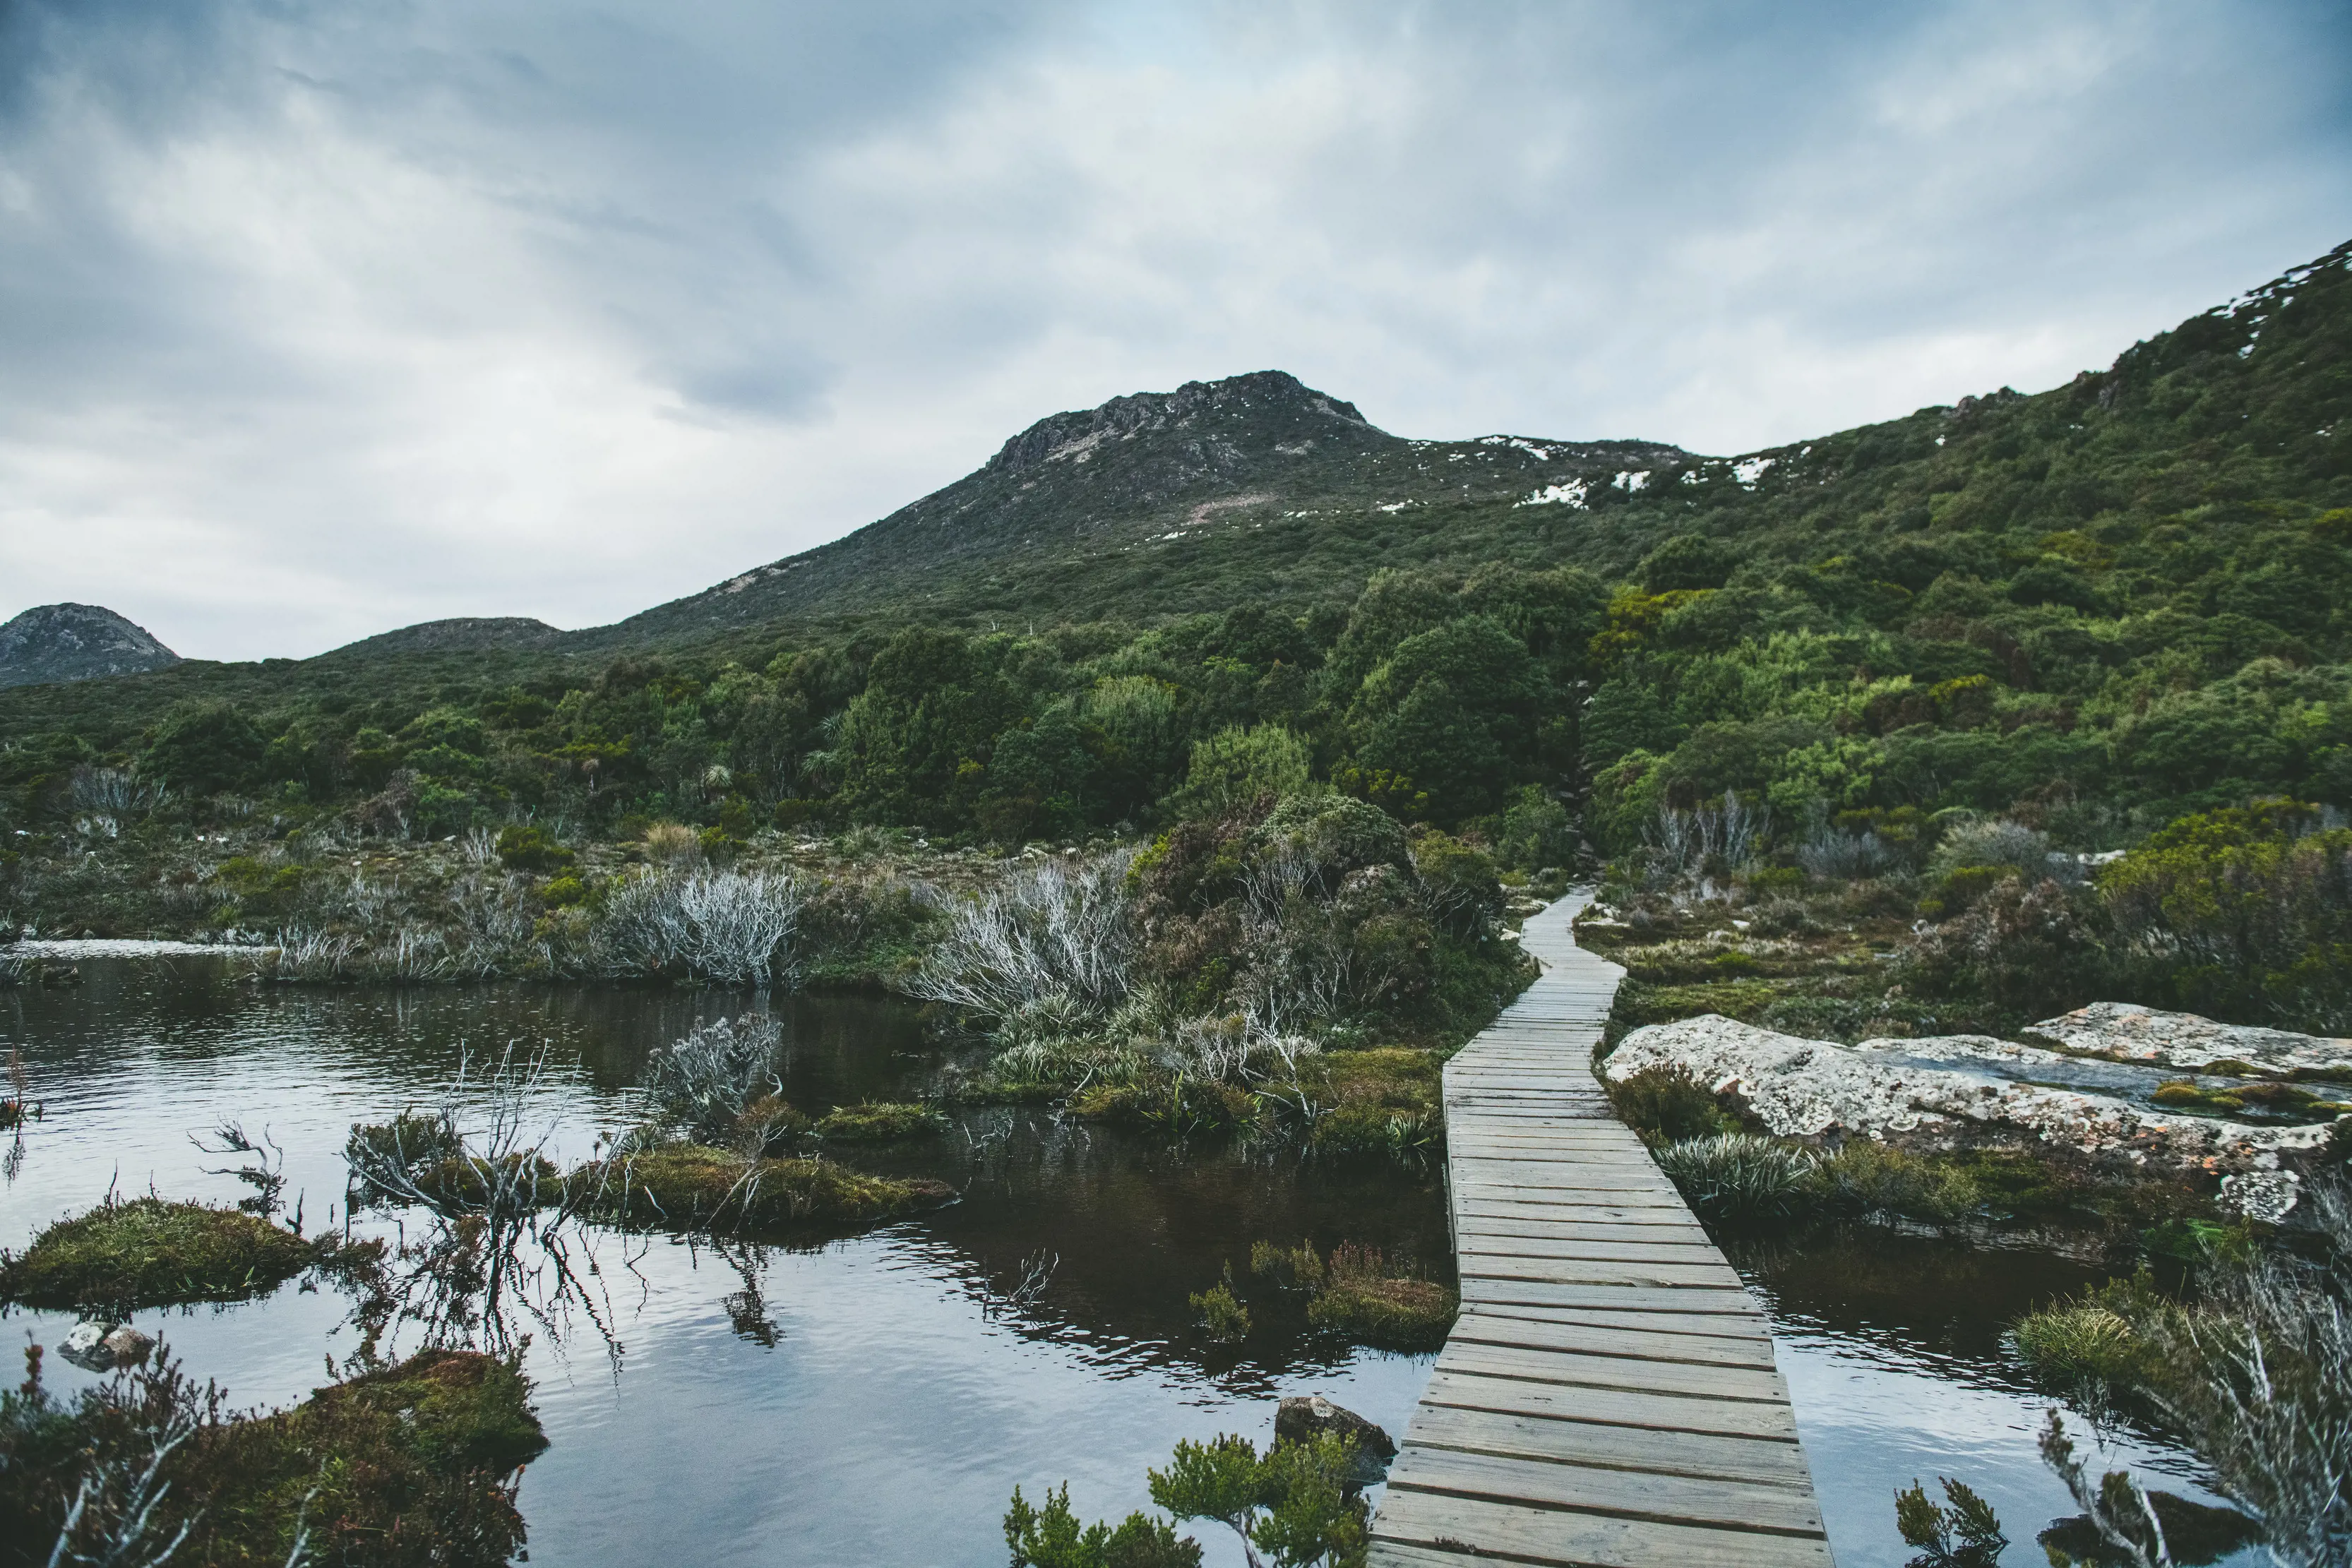 Wooden footpath over clear water, surrounded by dense bushland.